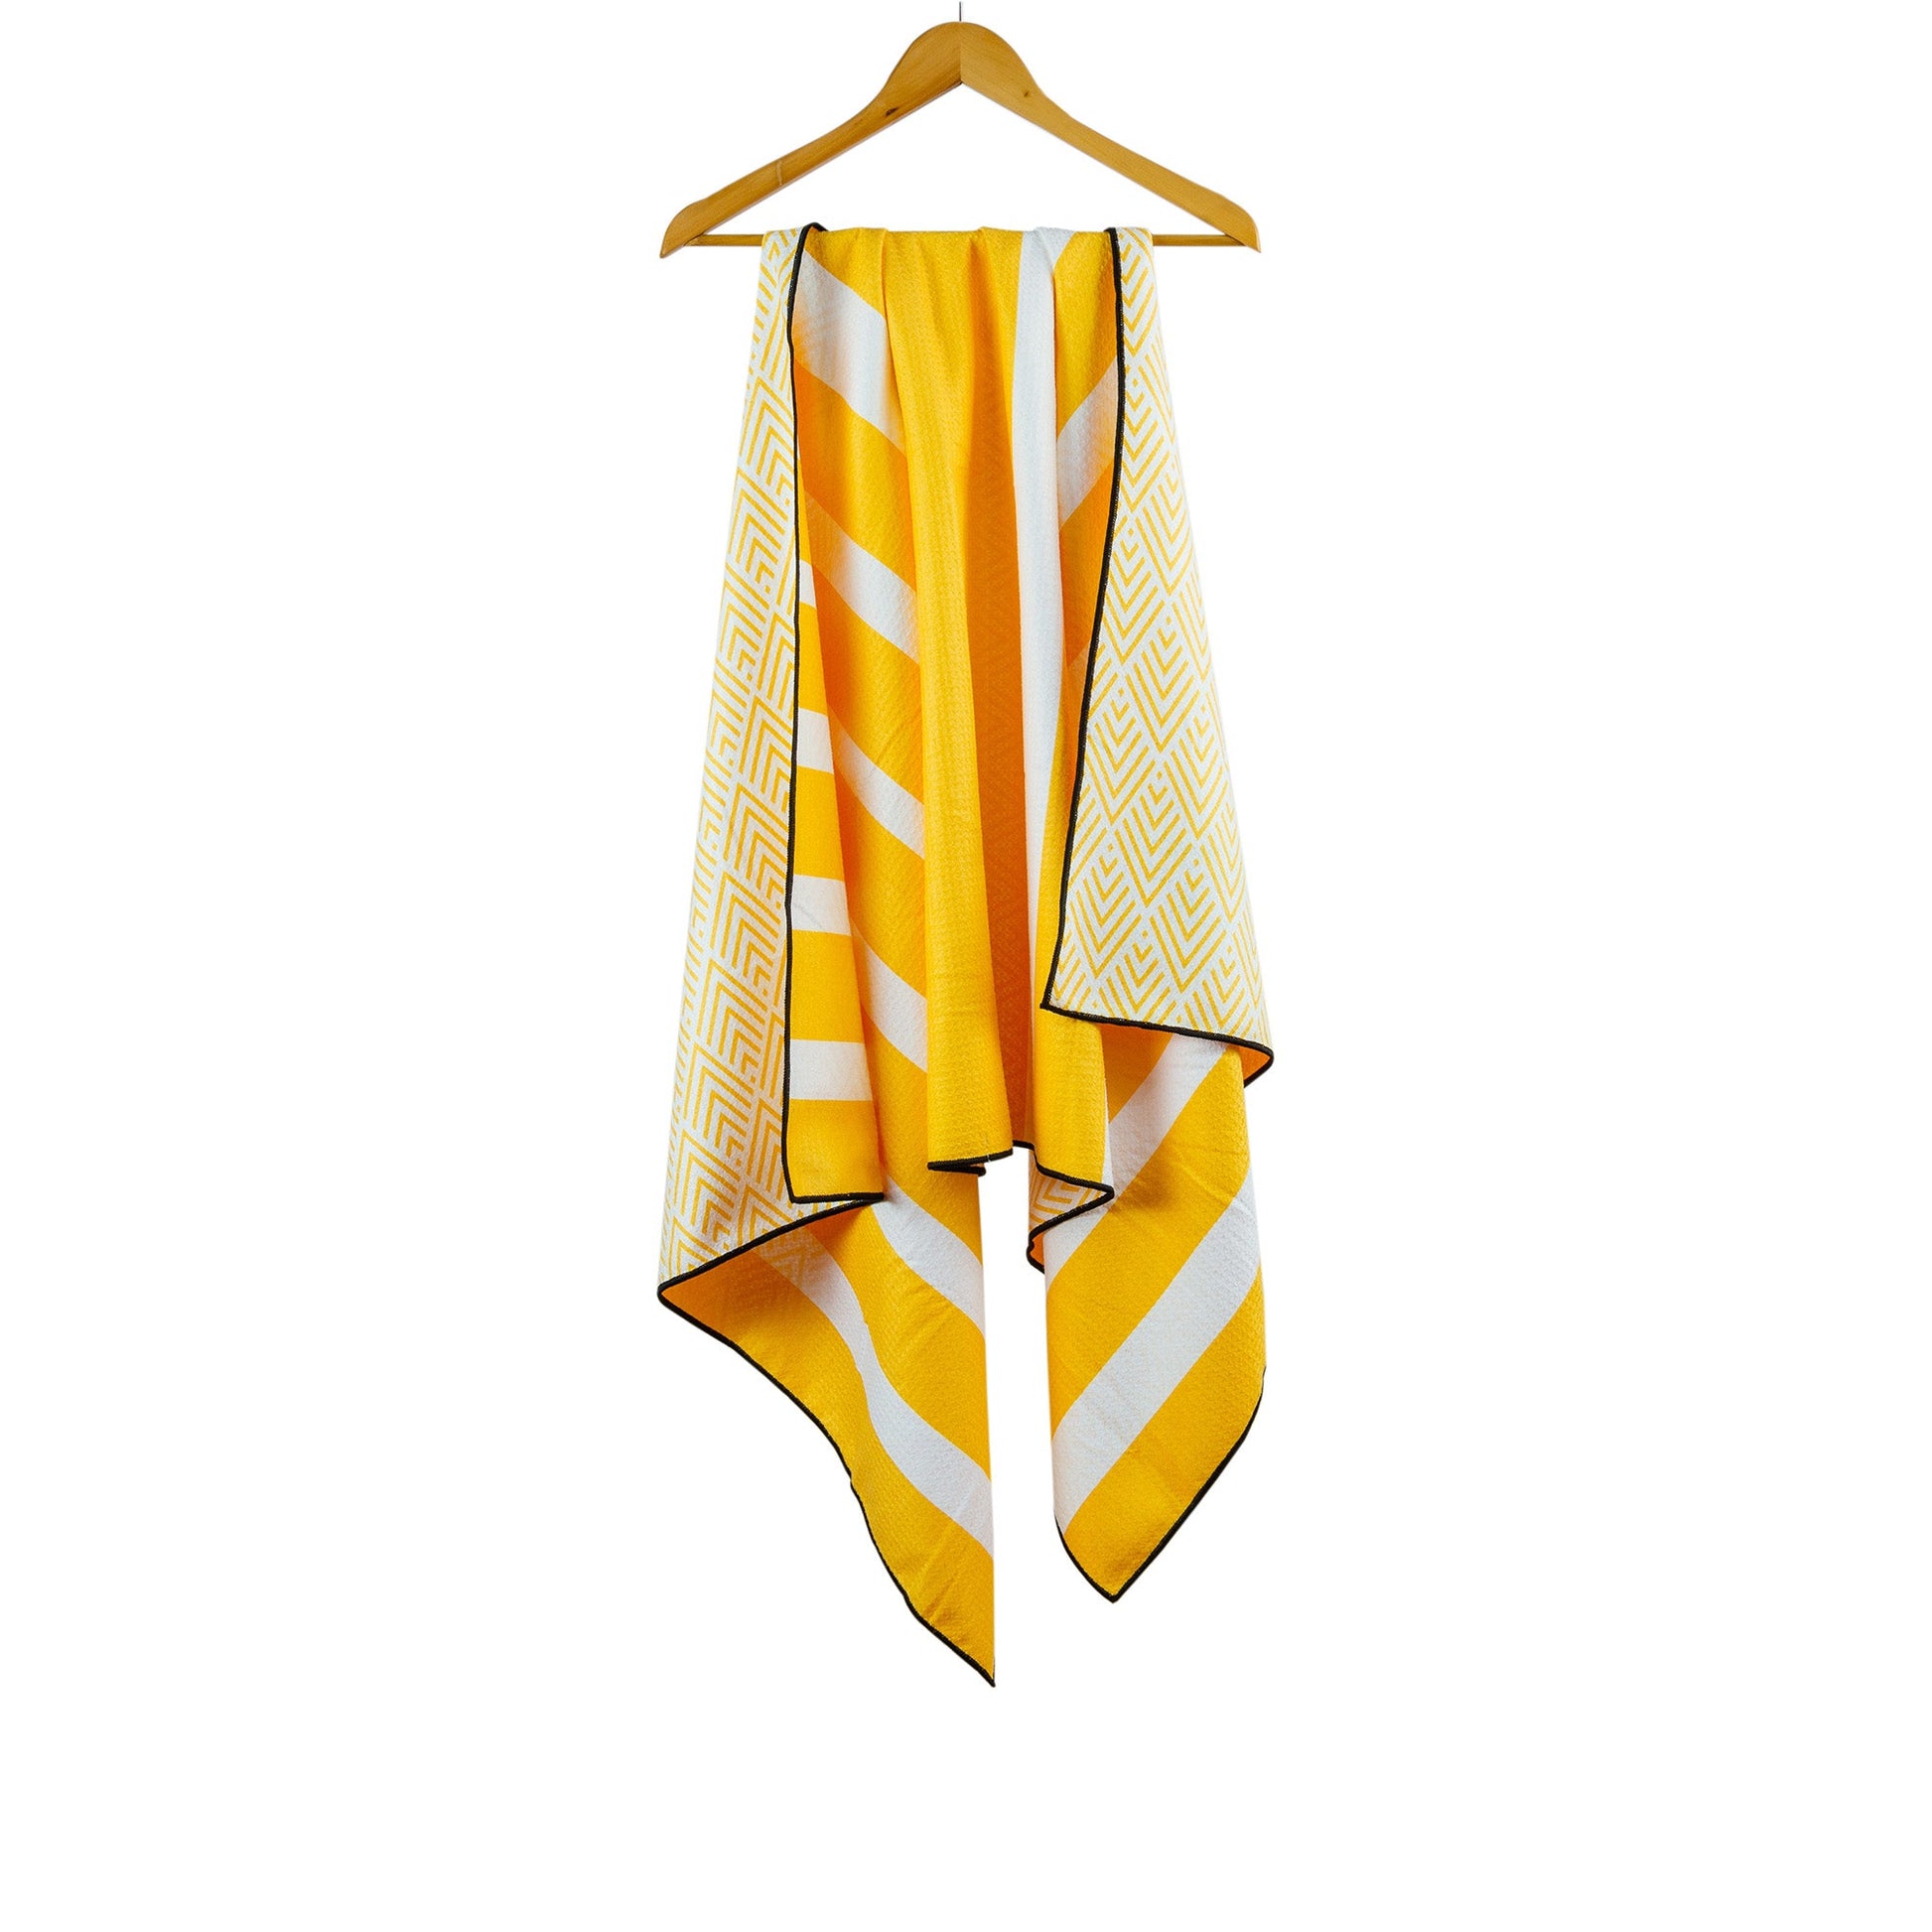 Yellow and white striped towel hanging on a coat hanger.